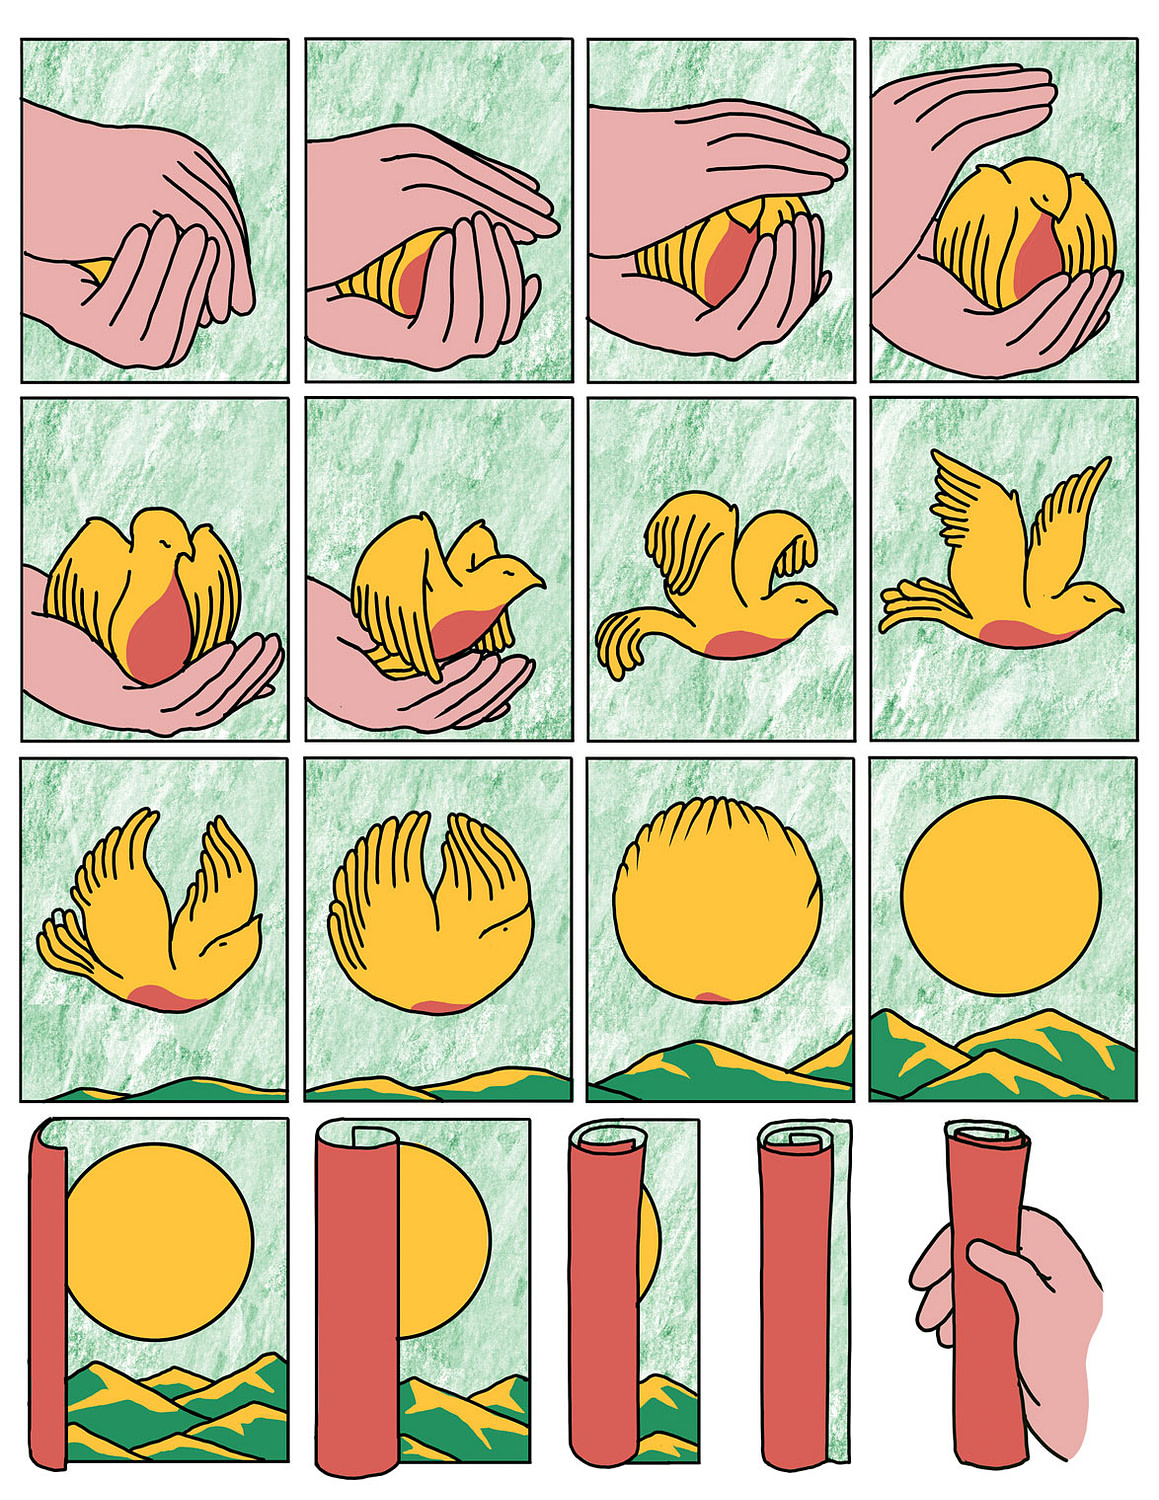 Comic about creativity in which a bird is released and becomes a sun